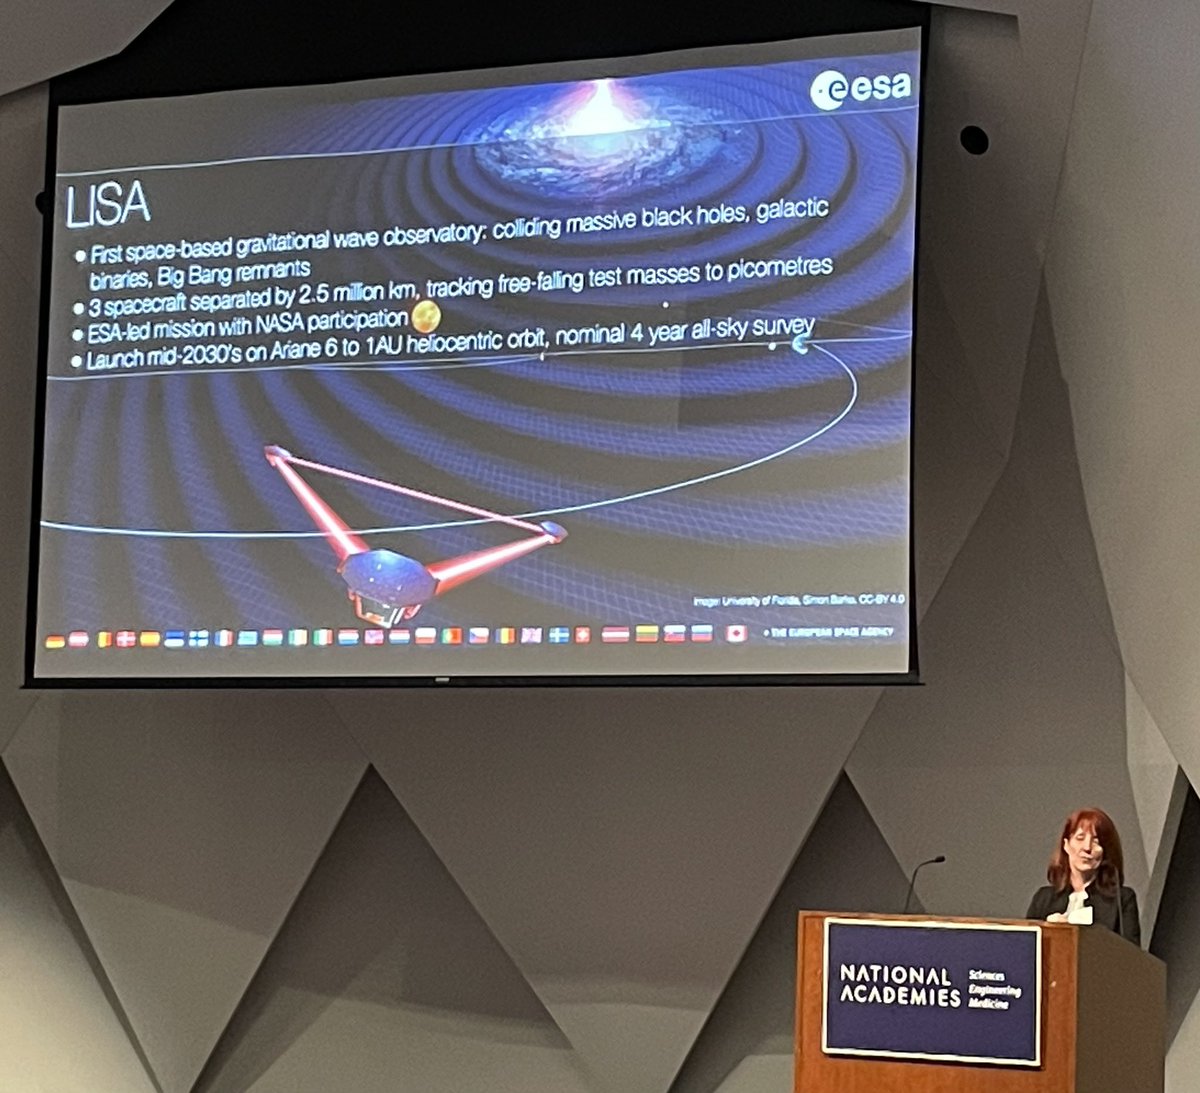 Dr. Carol Mundell, @esa science lead, presents at @theNASciences on coming missions. Look at this - space-based gravitational wave detection! And the ESA budget is up (UP!) ~20%!